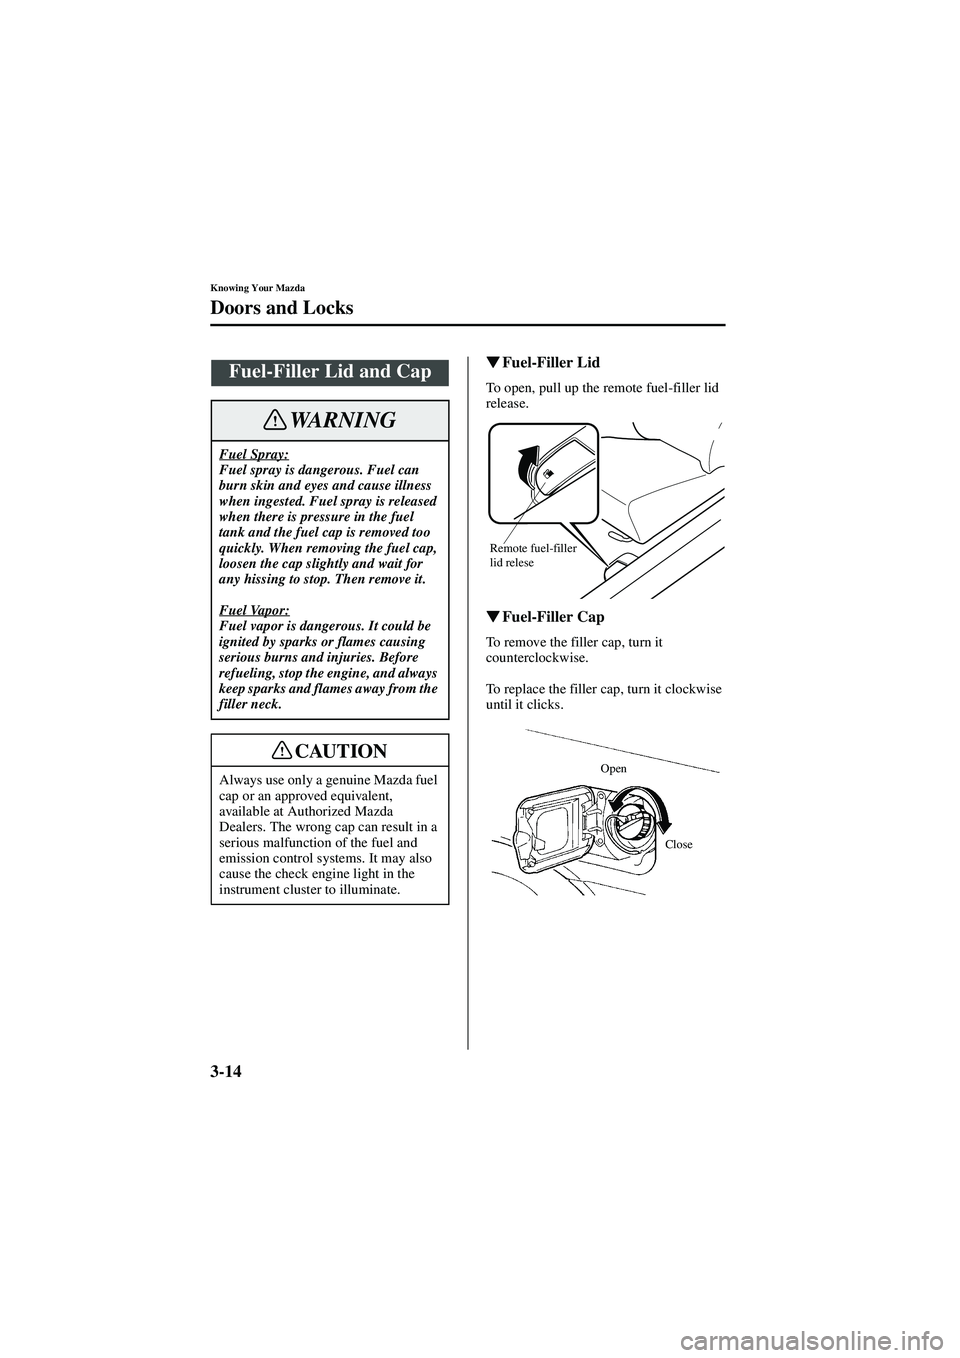 MAZDA MODEL 626 2002  Owners Manual 3-14
Knowing Your Mazda
Doors and Locks
Form No. 8Q50-EA-01G

  Fuel-Filler Lid
To open, pull up the remote fuel-filler lid 
release.

  Fuel-Filler Cap
To remove the filler cap, turn it 
coun